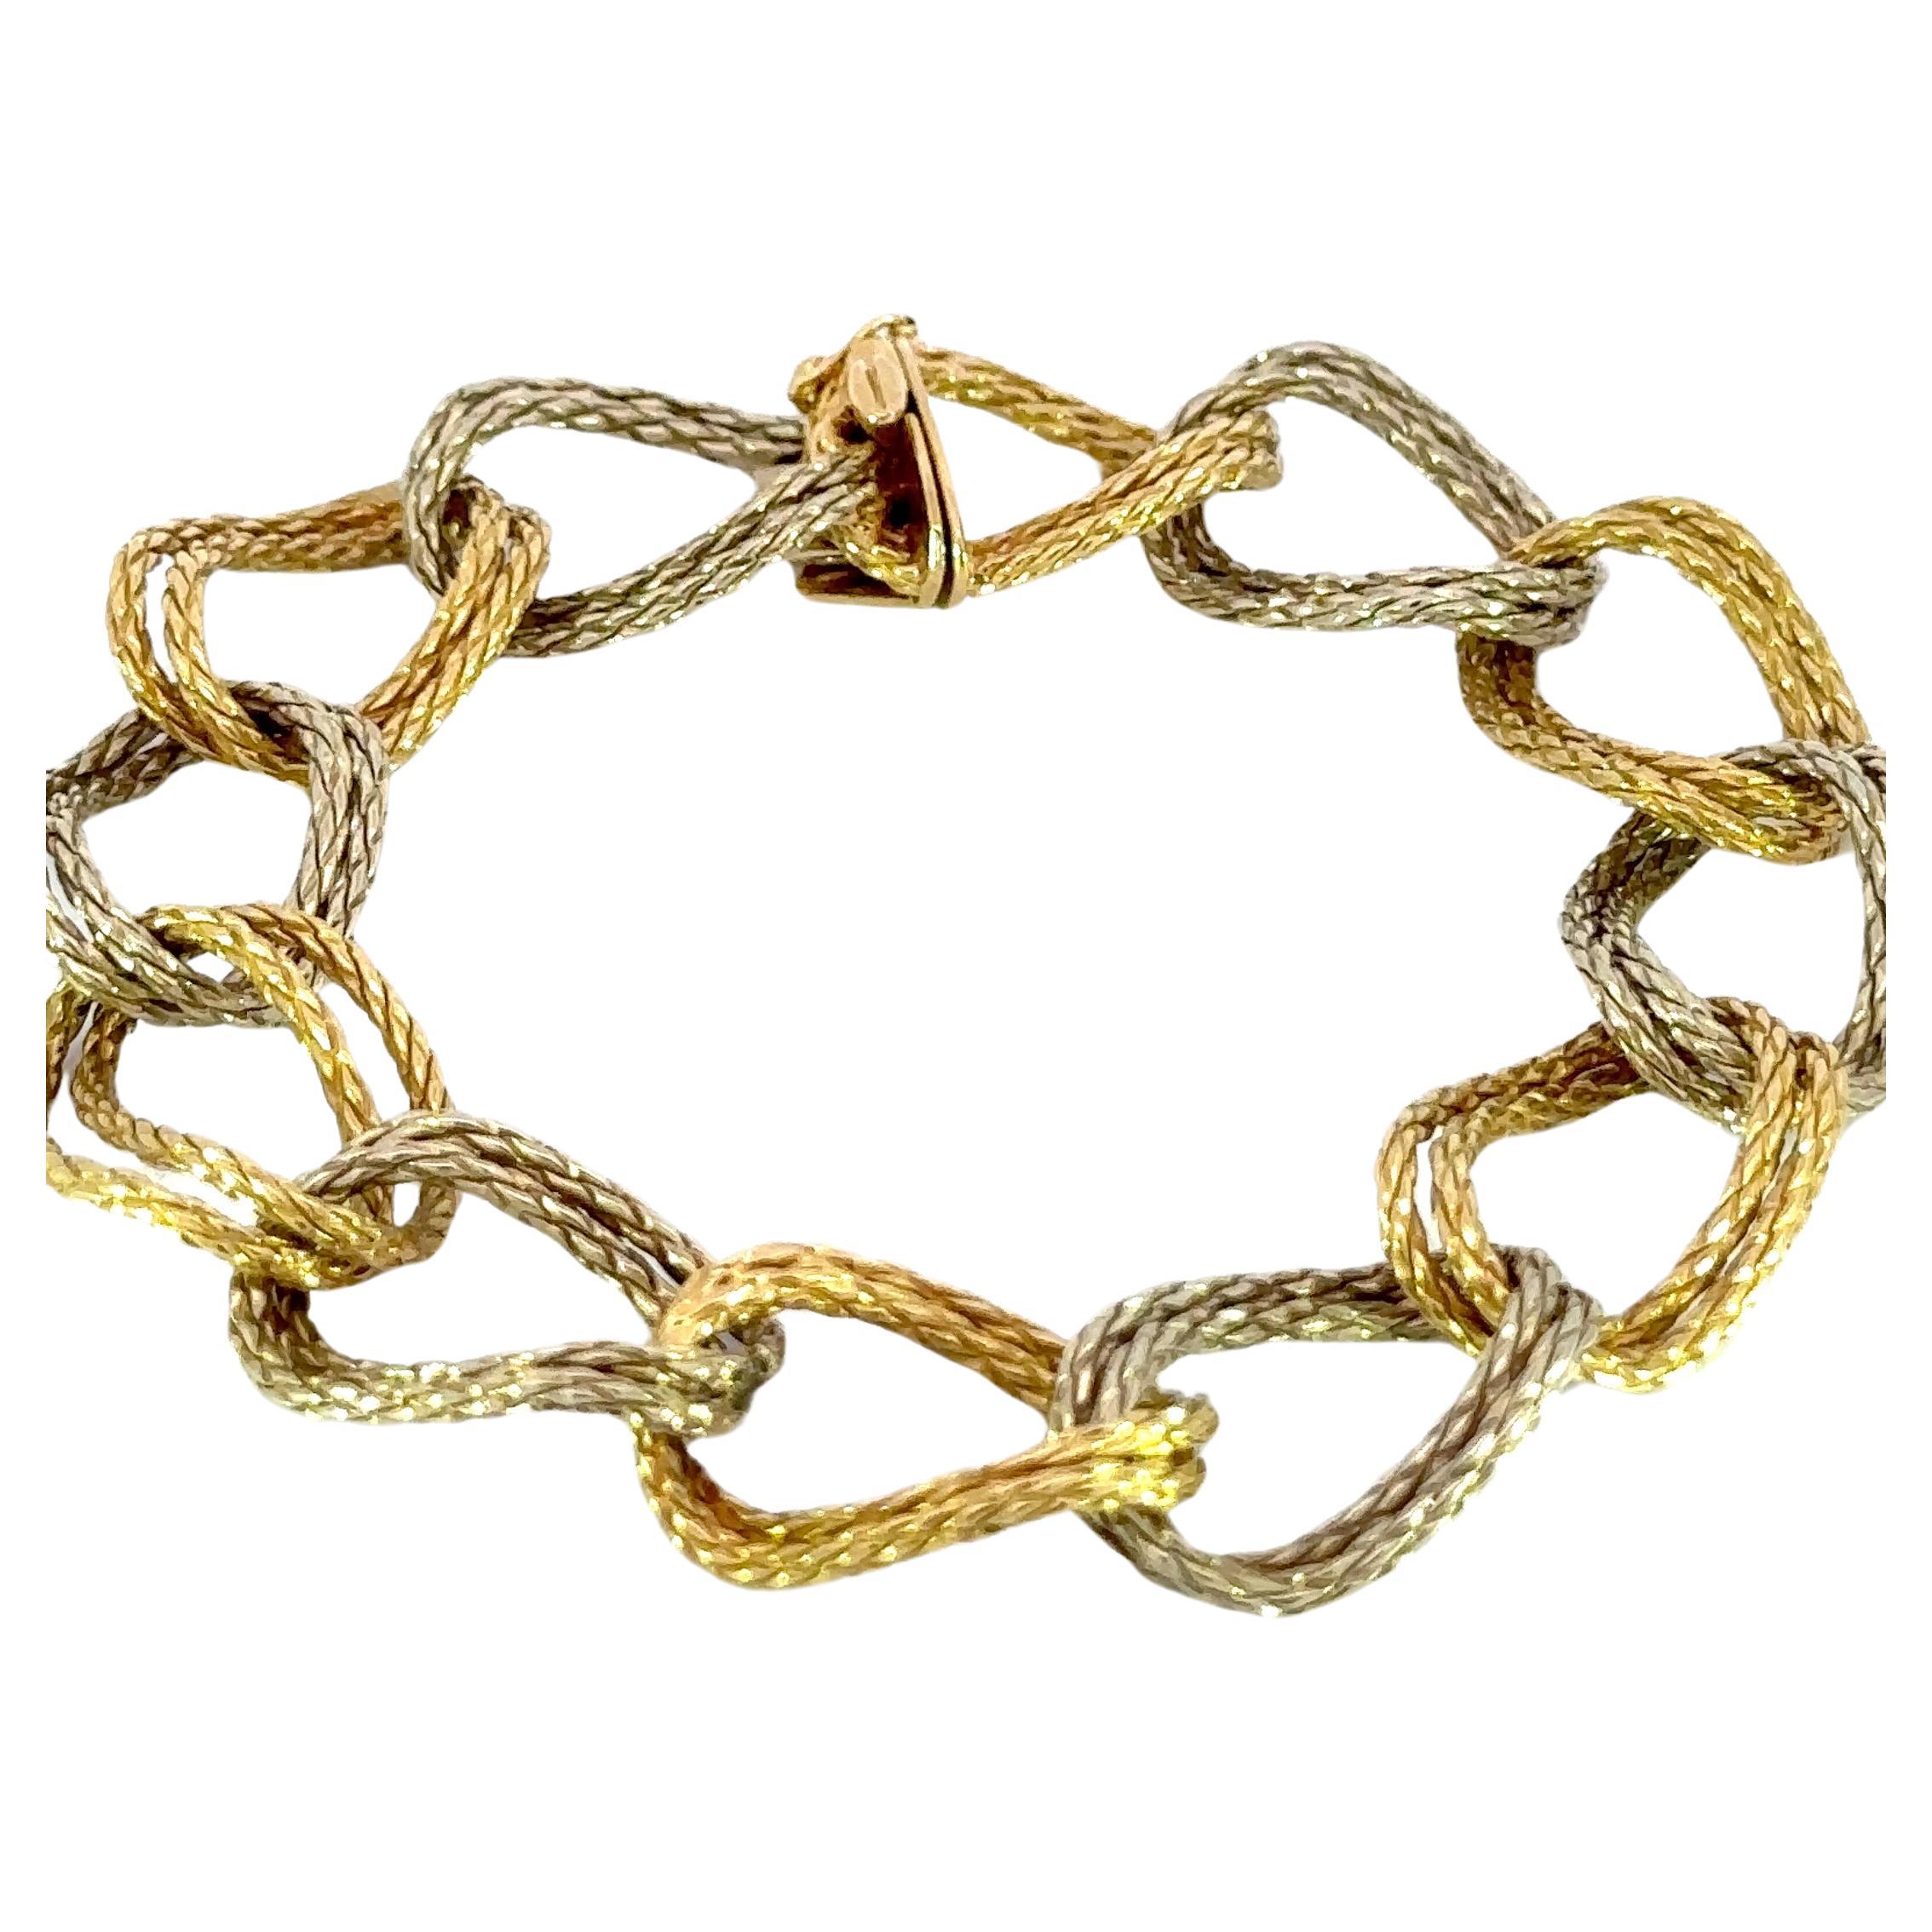 Bvlgari 18K Gold Two-Tone Twisted Double Rope Link Bracelet